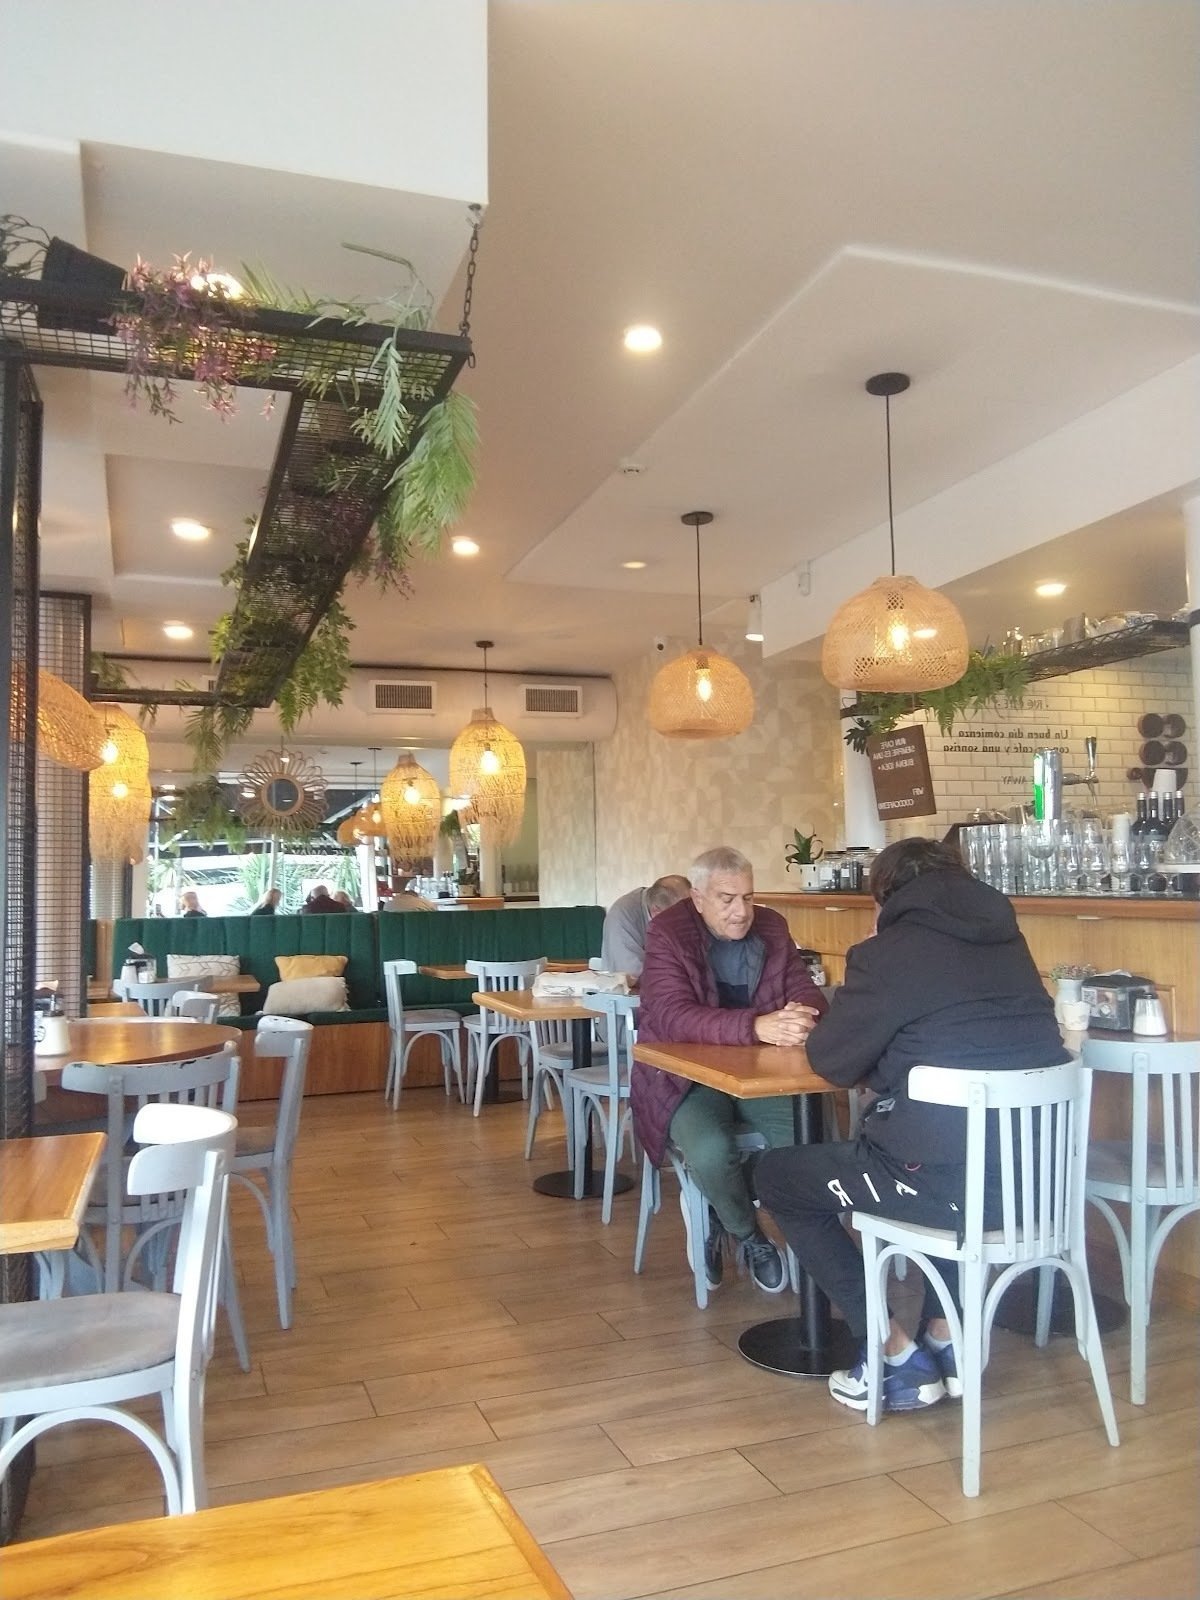 <span class="translation_missing" title="translation missing: en.meta.location_title, location_name: Coco Cafe MDP, city: Mar del Plata">Location Title</span>